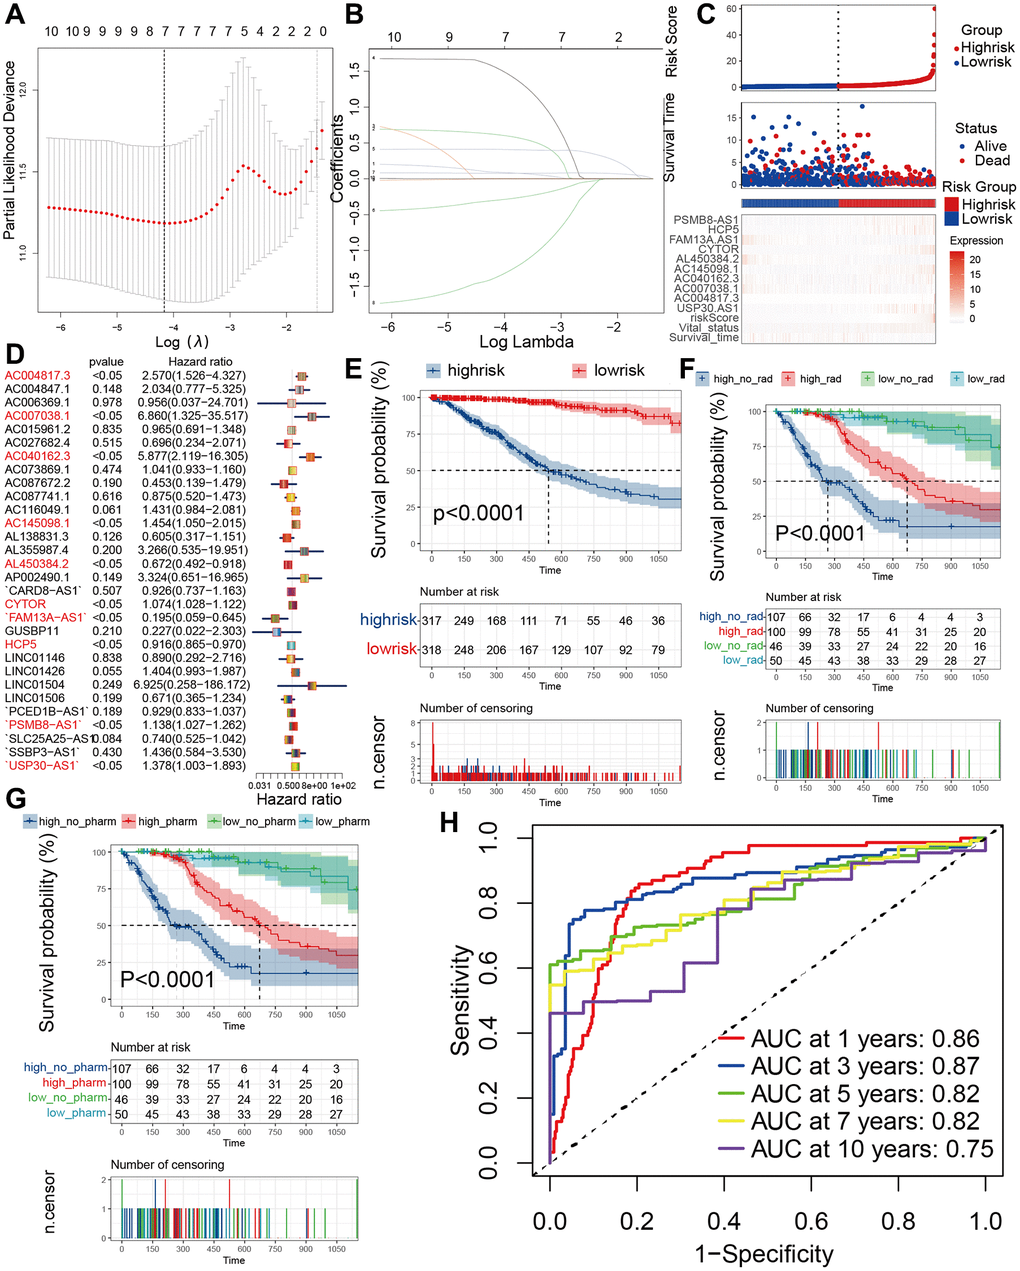 Predicting patient prognosis in the TCGA cohort based on PRLPM. (A) Regression coefficient profiles of identified pyroptosis immune regulators in the TCGA cohort. (B) Ten-time cross-validation for tuning parameter selection in the TCGA cohort. (C) Patients were divided into high and low-risk subgroups according to median level of PRLPM riskscore in train set; heatmap of 9 PRLs. (D) multivariate cox regression analyses of the association between PRLs and OS of patients in the TCGA cohort. (E) KM curve plot of OS for patients in high and low-risk subgroups. (F, G) Survival analyses for subgroup patients stratified by both PRLPM riskscore and treatment with radiotherapy (F) and pharmacological chemotherapy (G) in the TCGA cohort. (H) The timeROC curve to evaluate the prognostic value of PRLPM riskscore in TCGA cohort.